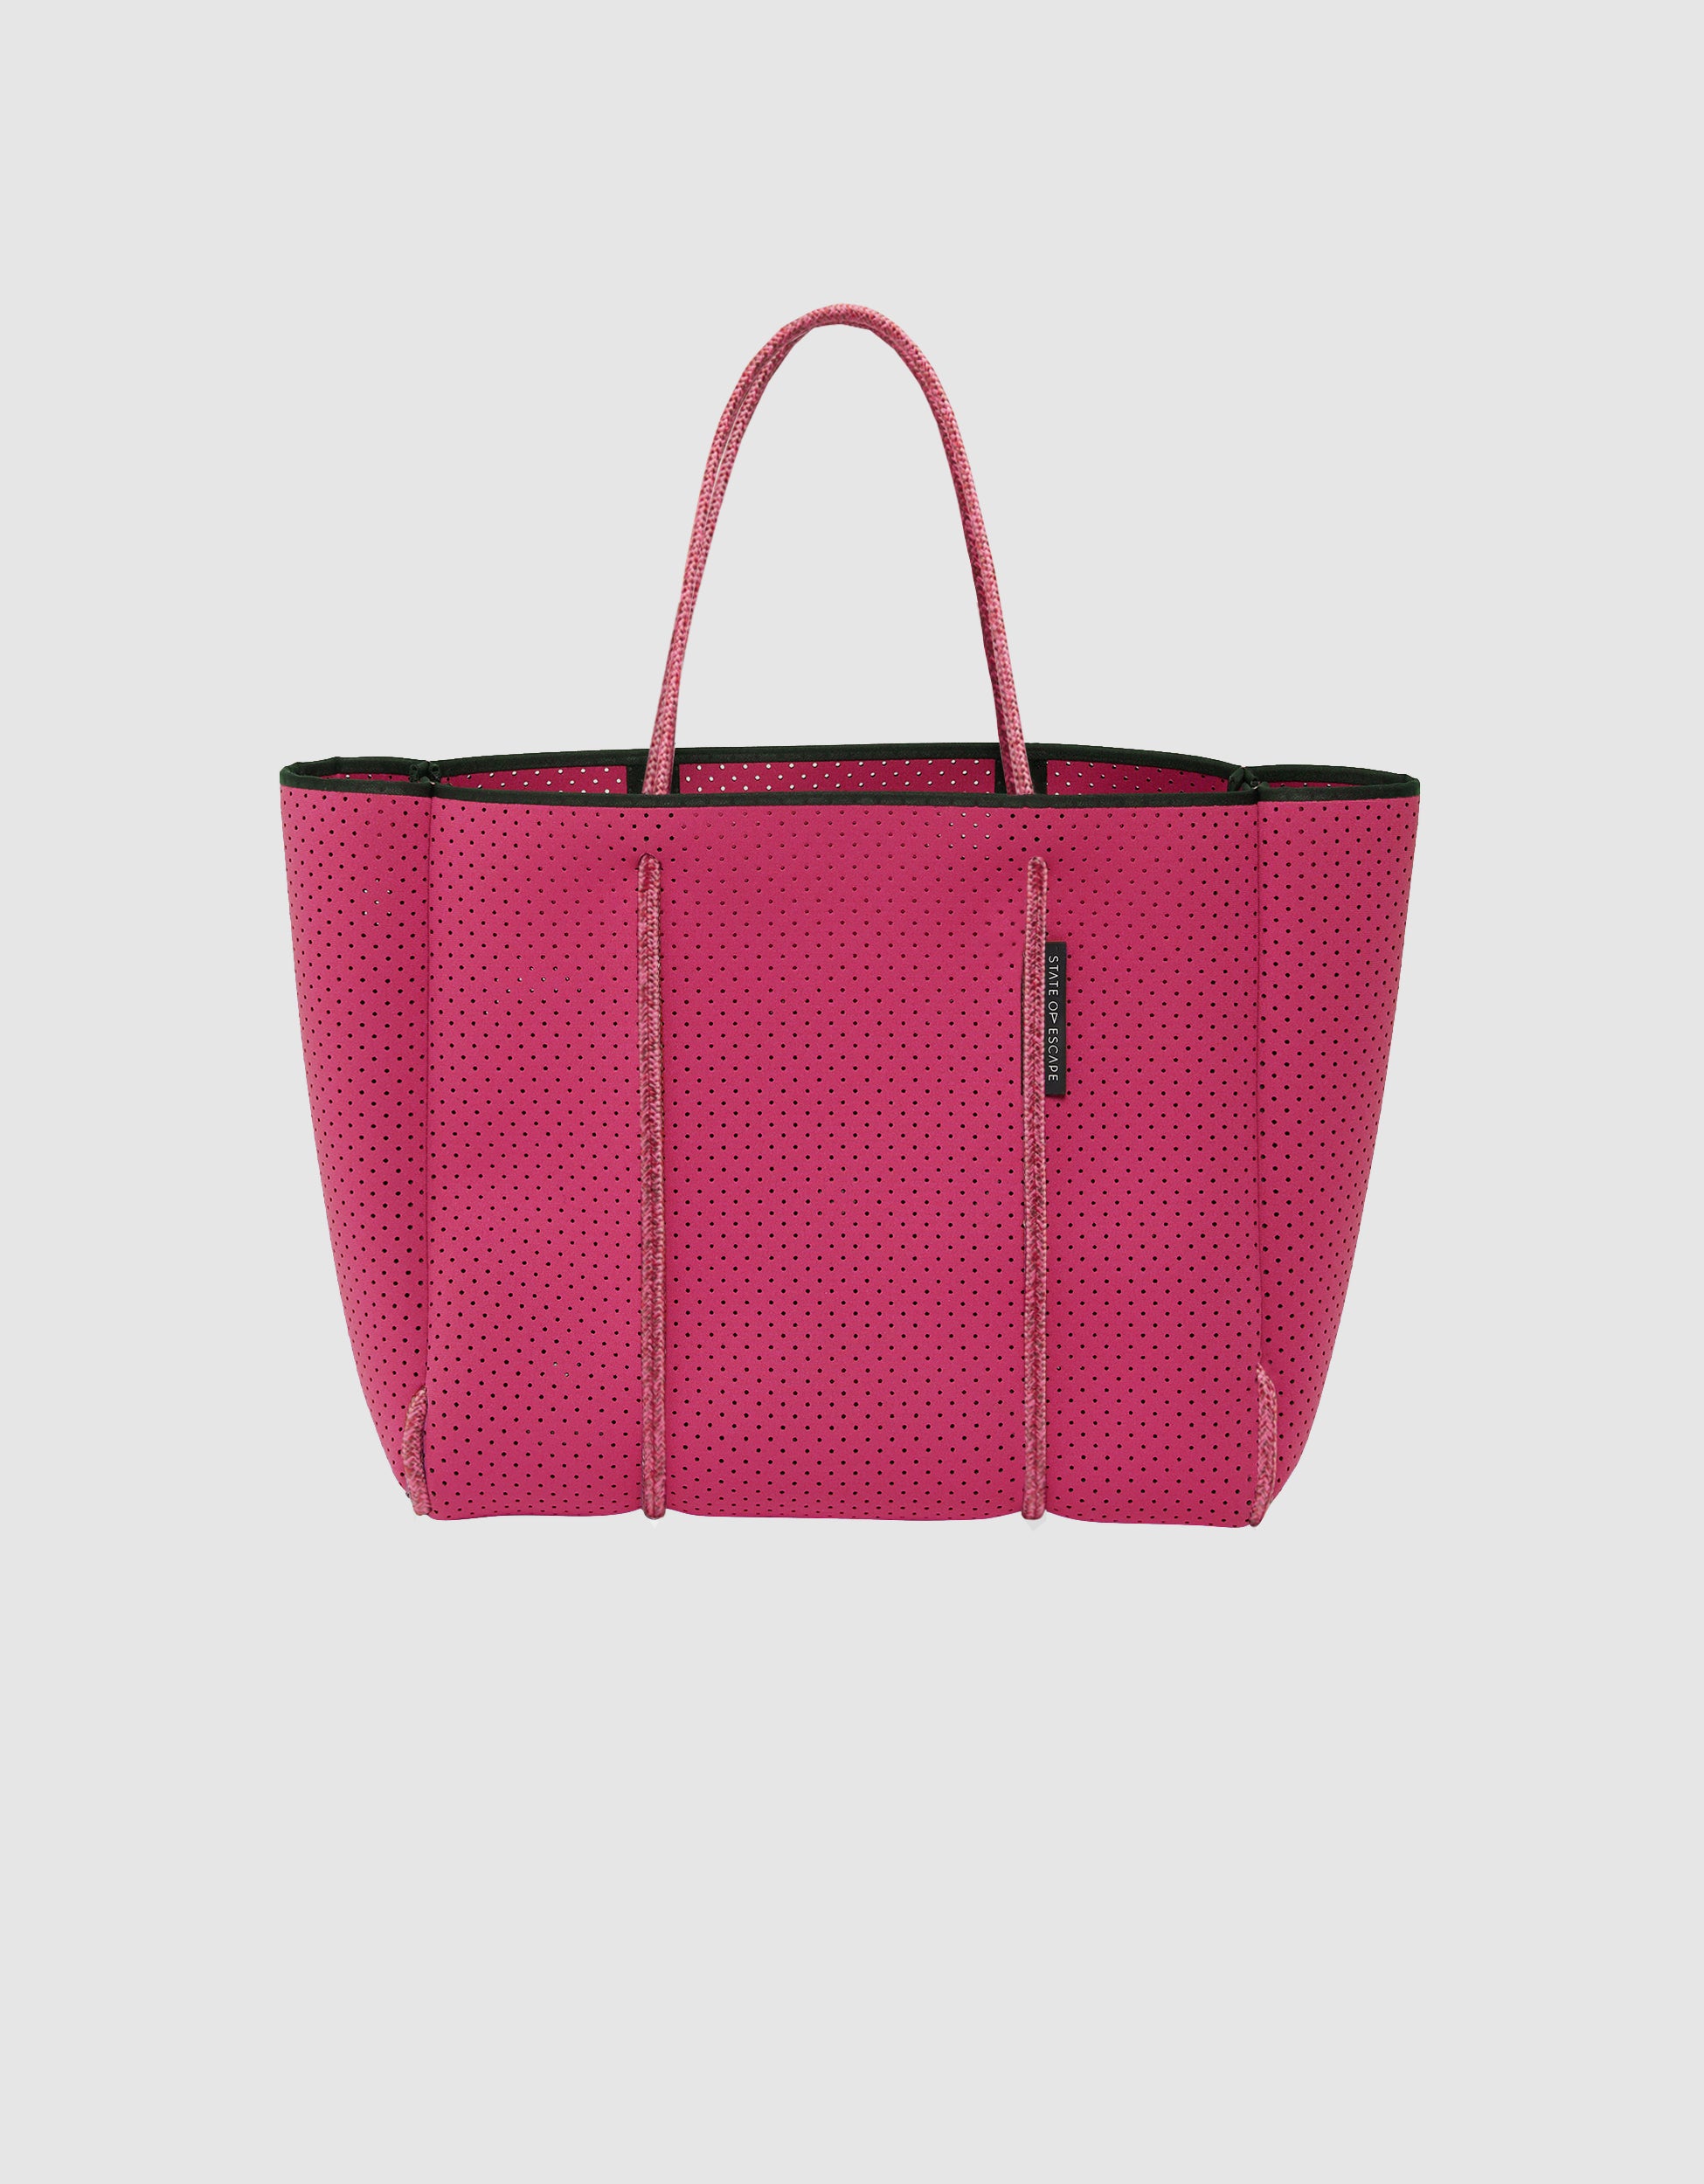 Flying Solo tote in raspberry – State of Escape